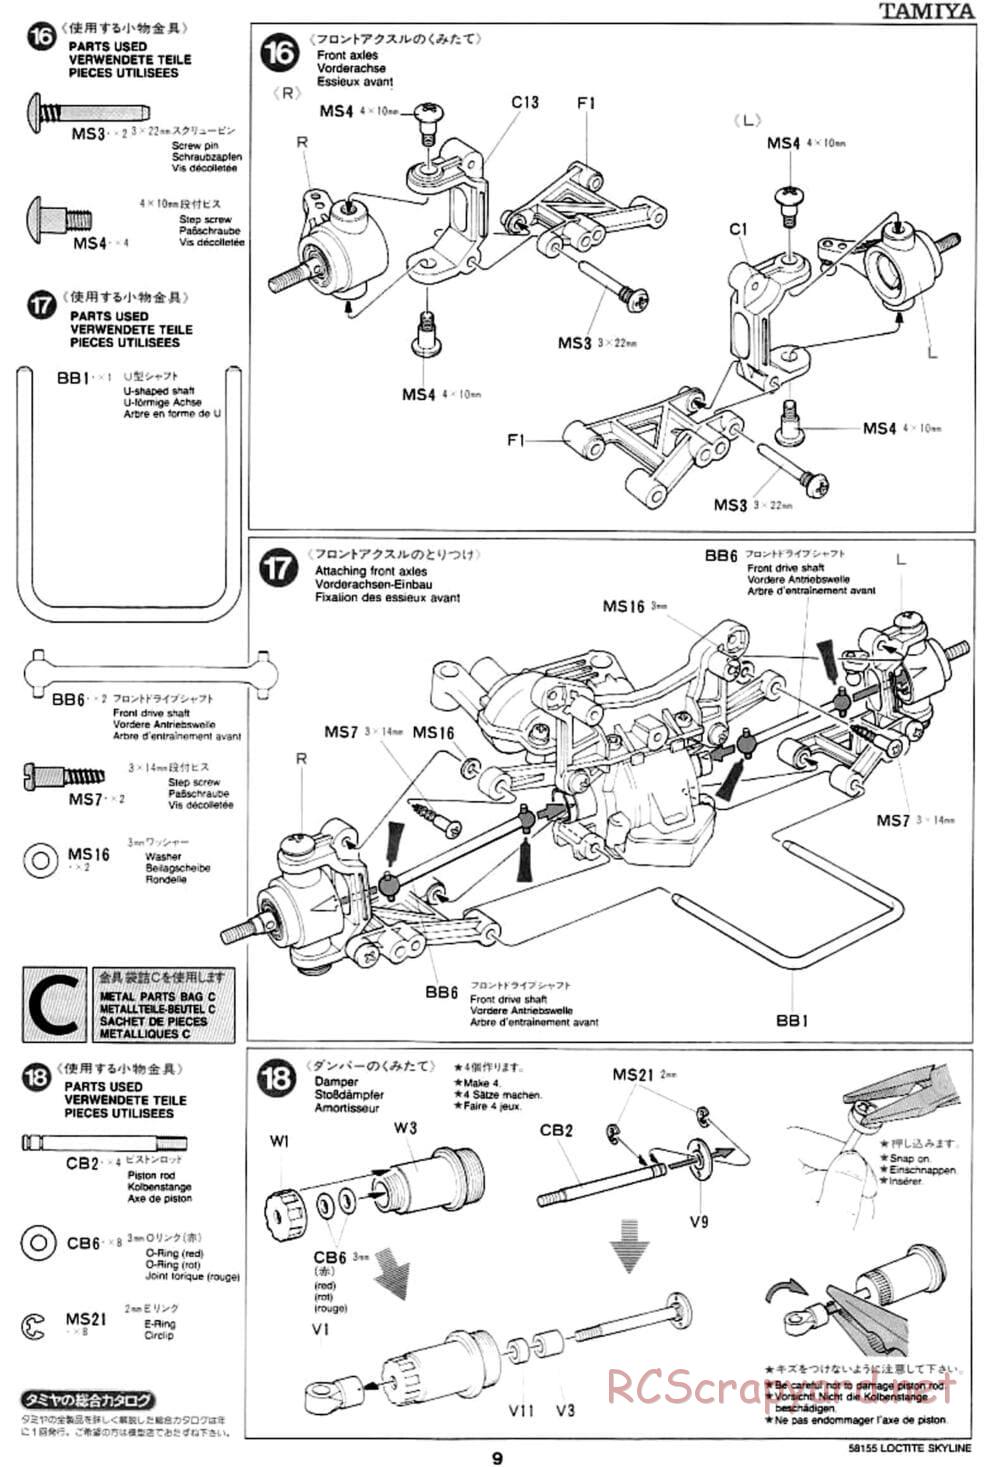 Tamiya - Loctite Nissan Skyline GT-R N1 - TA-02 Chassis - Manual - Page 9